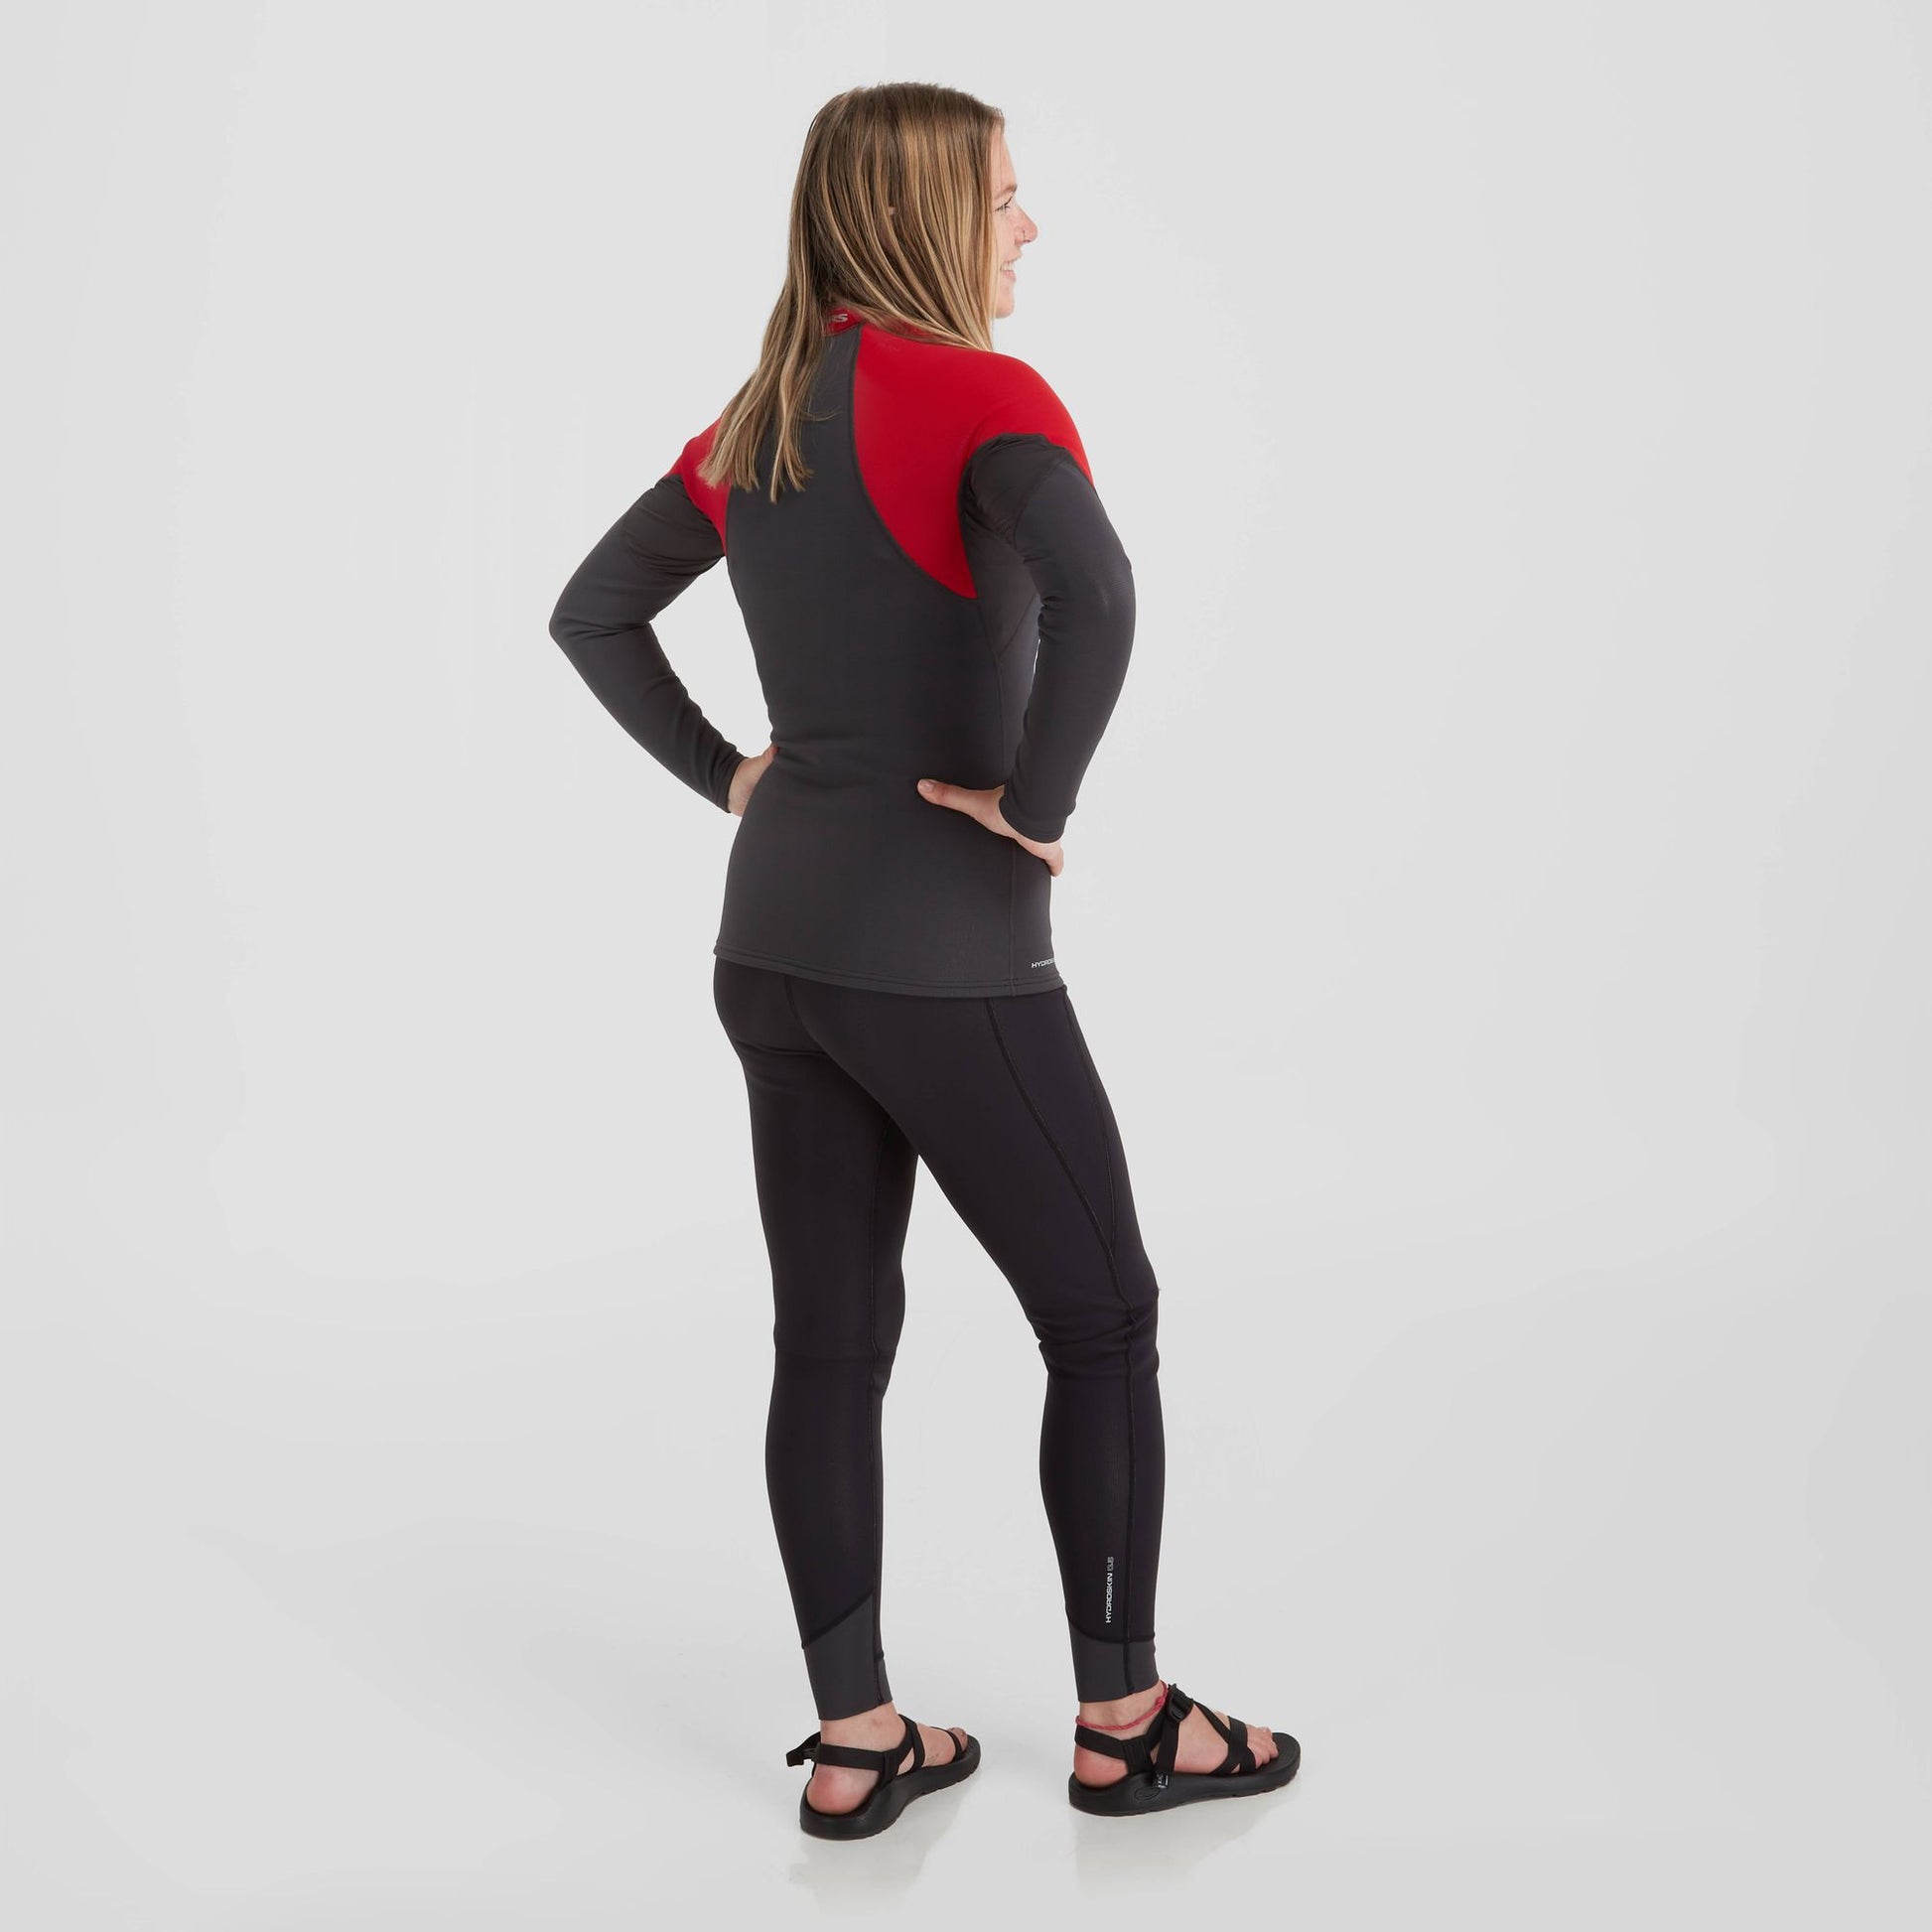 The back view of a woman wearing a NRS Hydroskin 0.5 Long Sleeve Shirt - Women's, an insulating top that is part of her layering arsenal.